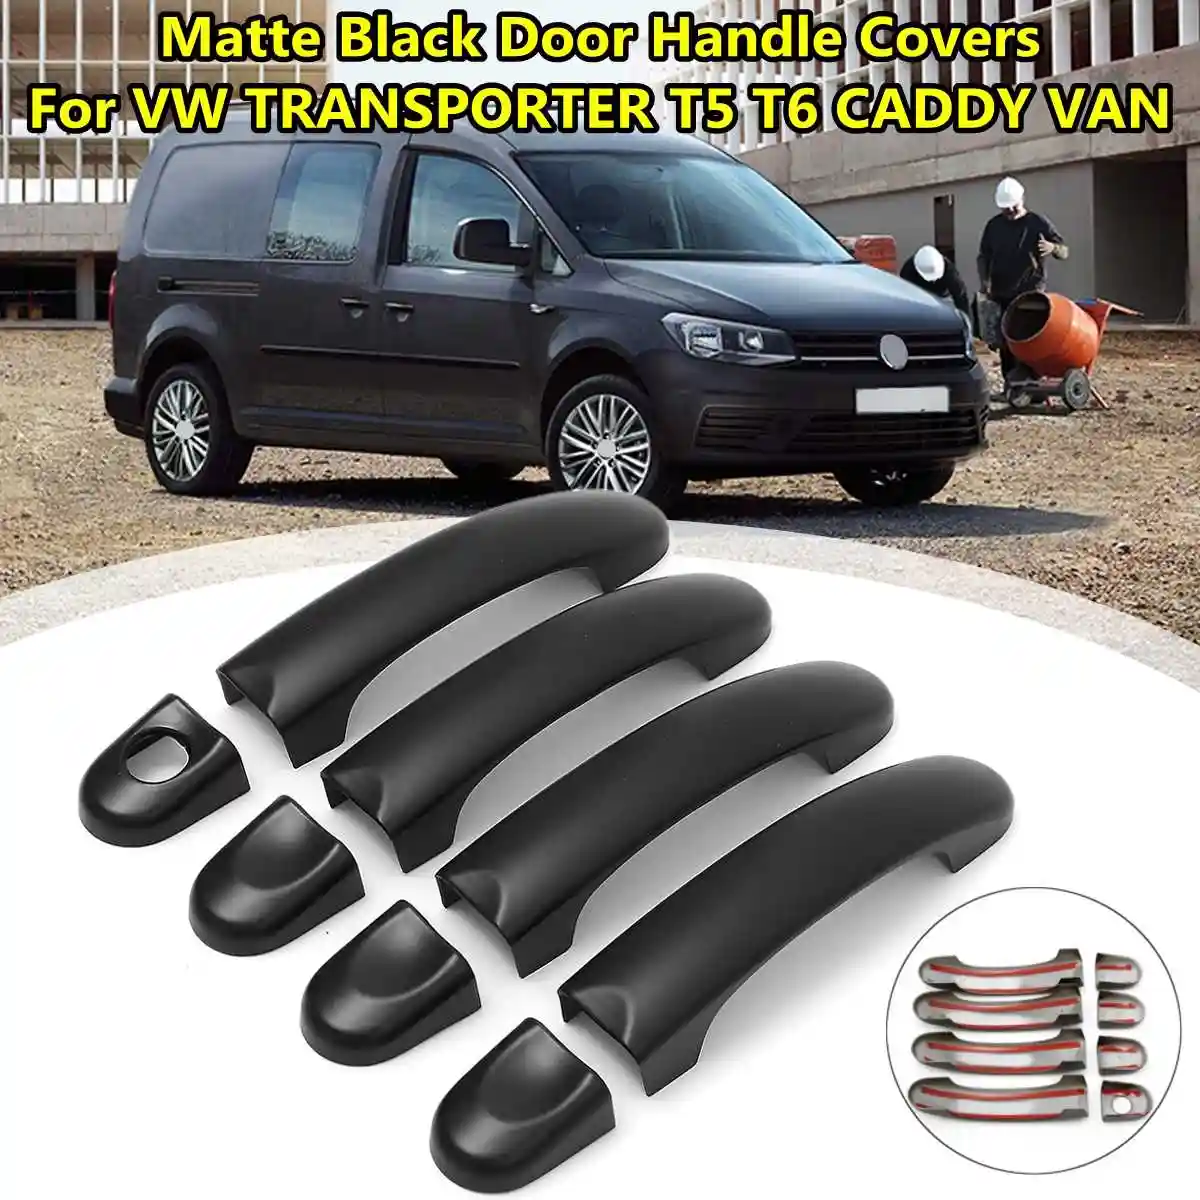 SHOUNAO 9pcs Set ABS Carbon Fiber Door Handle Covers Trim Fit For VW TRANSPORTER Fit For T5 2003-2015 Fit For T6 2015-up Fit For CADDY VAN 2004-2015 